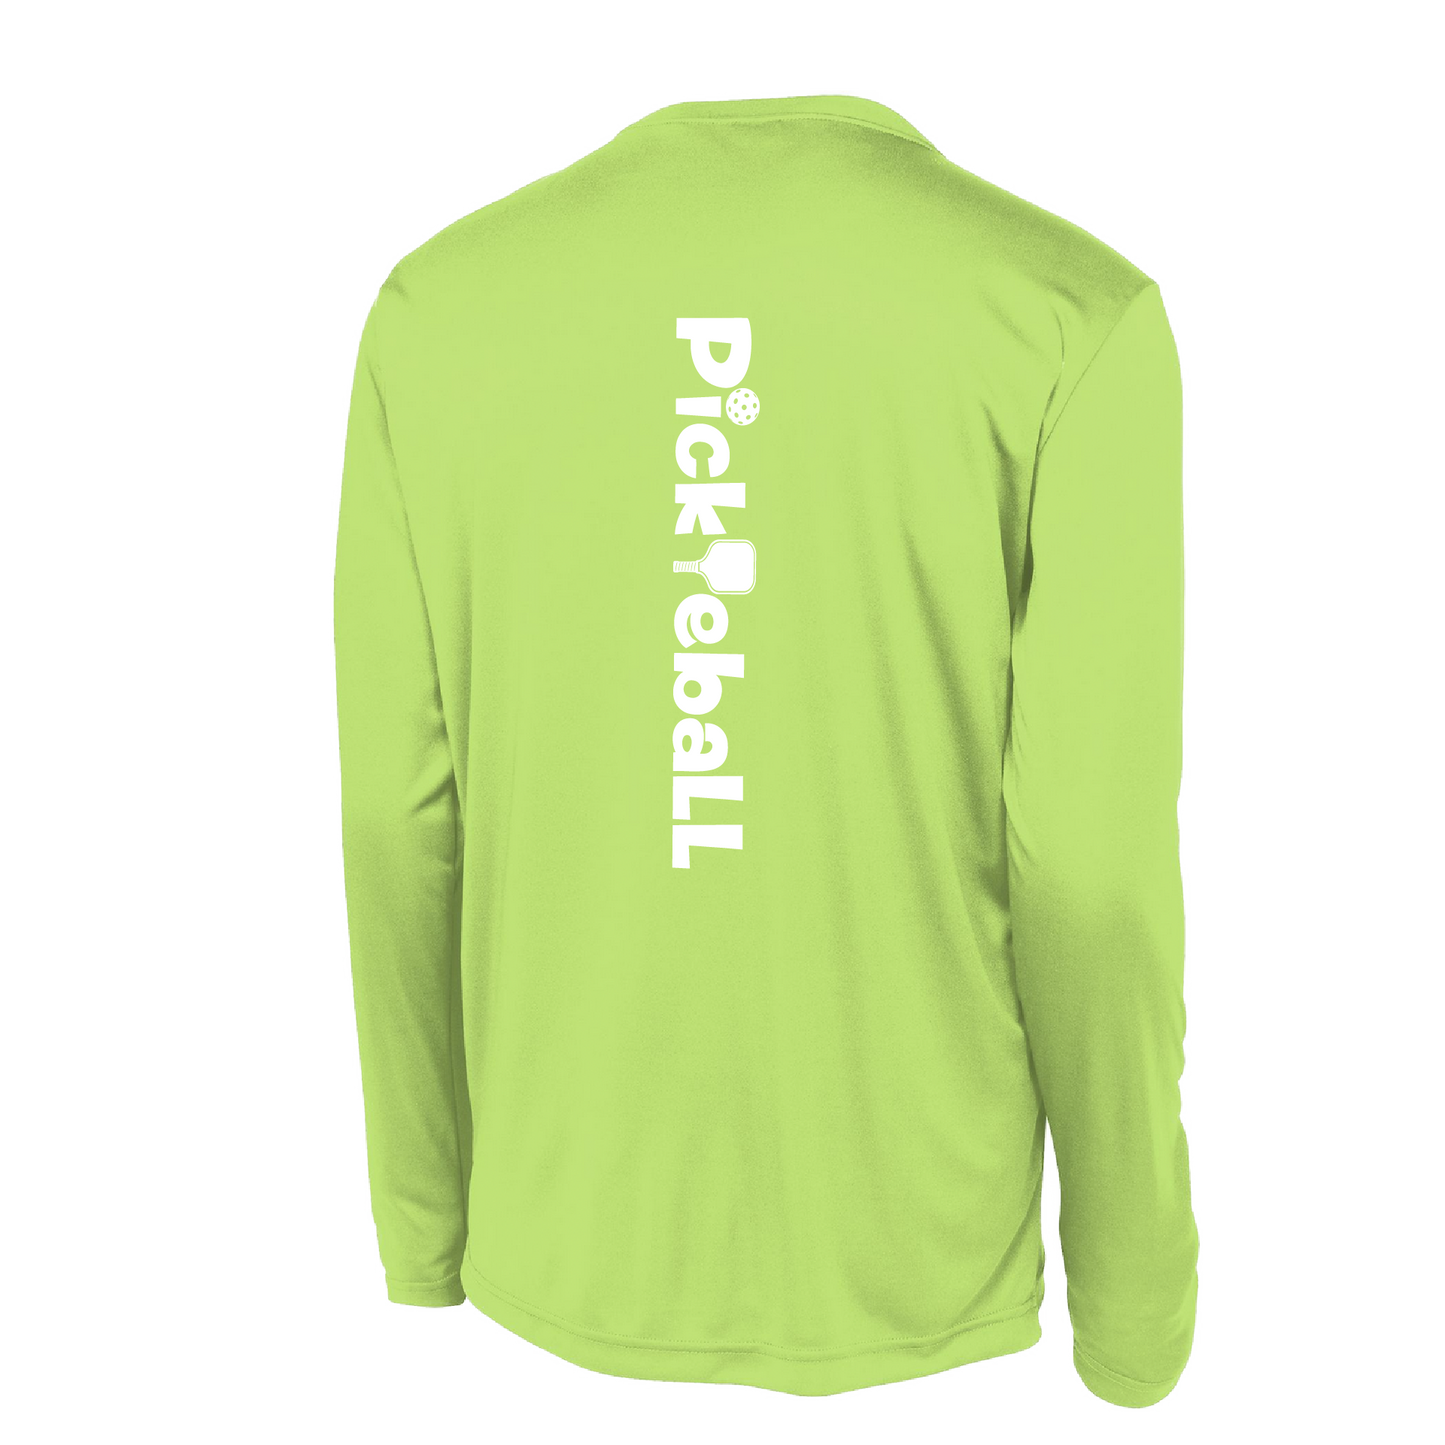 Pickleball Design: Pickleball Horizontal Customizable Location  Men's Style: Long Sleeve  Shirts are lightweight, roomy and highly breathable. These moisture-wicking shirts are designed for athletic performance. They feature PosiCharge technology to lock in color and prevent logos from fading. Removable tag and set-in sleeves for comfort. 